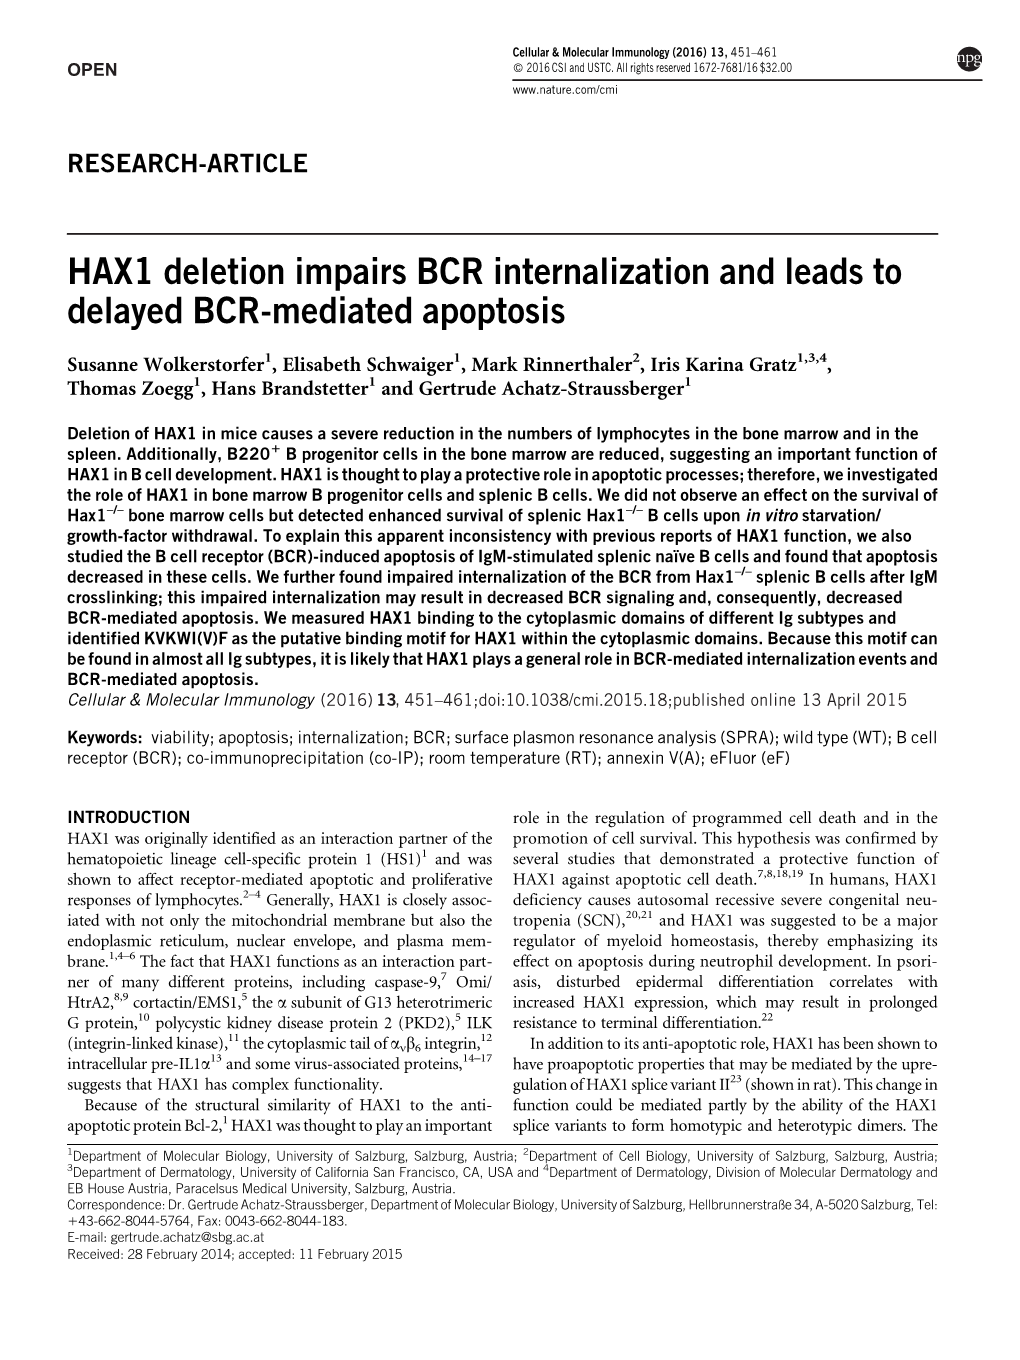 HAX1 Deletion Impairs BCR Internalization and Leads to Delayed BCR-Mediated Apoptosis